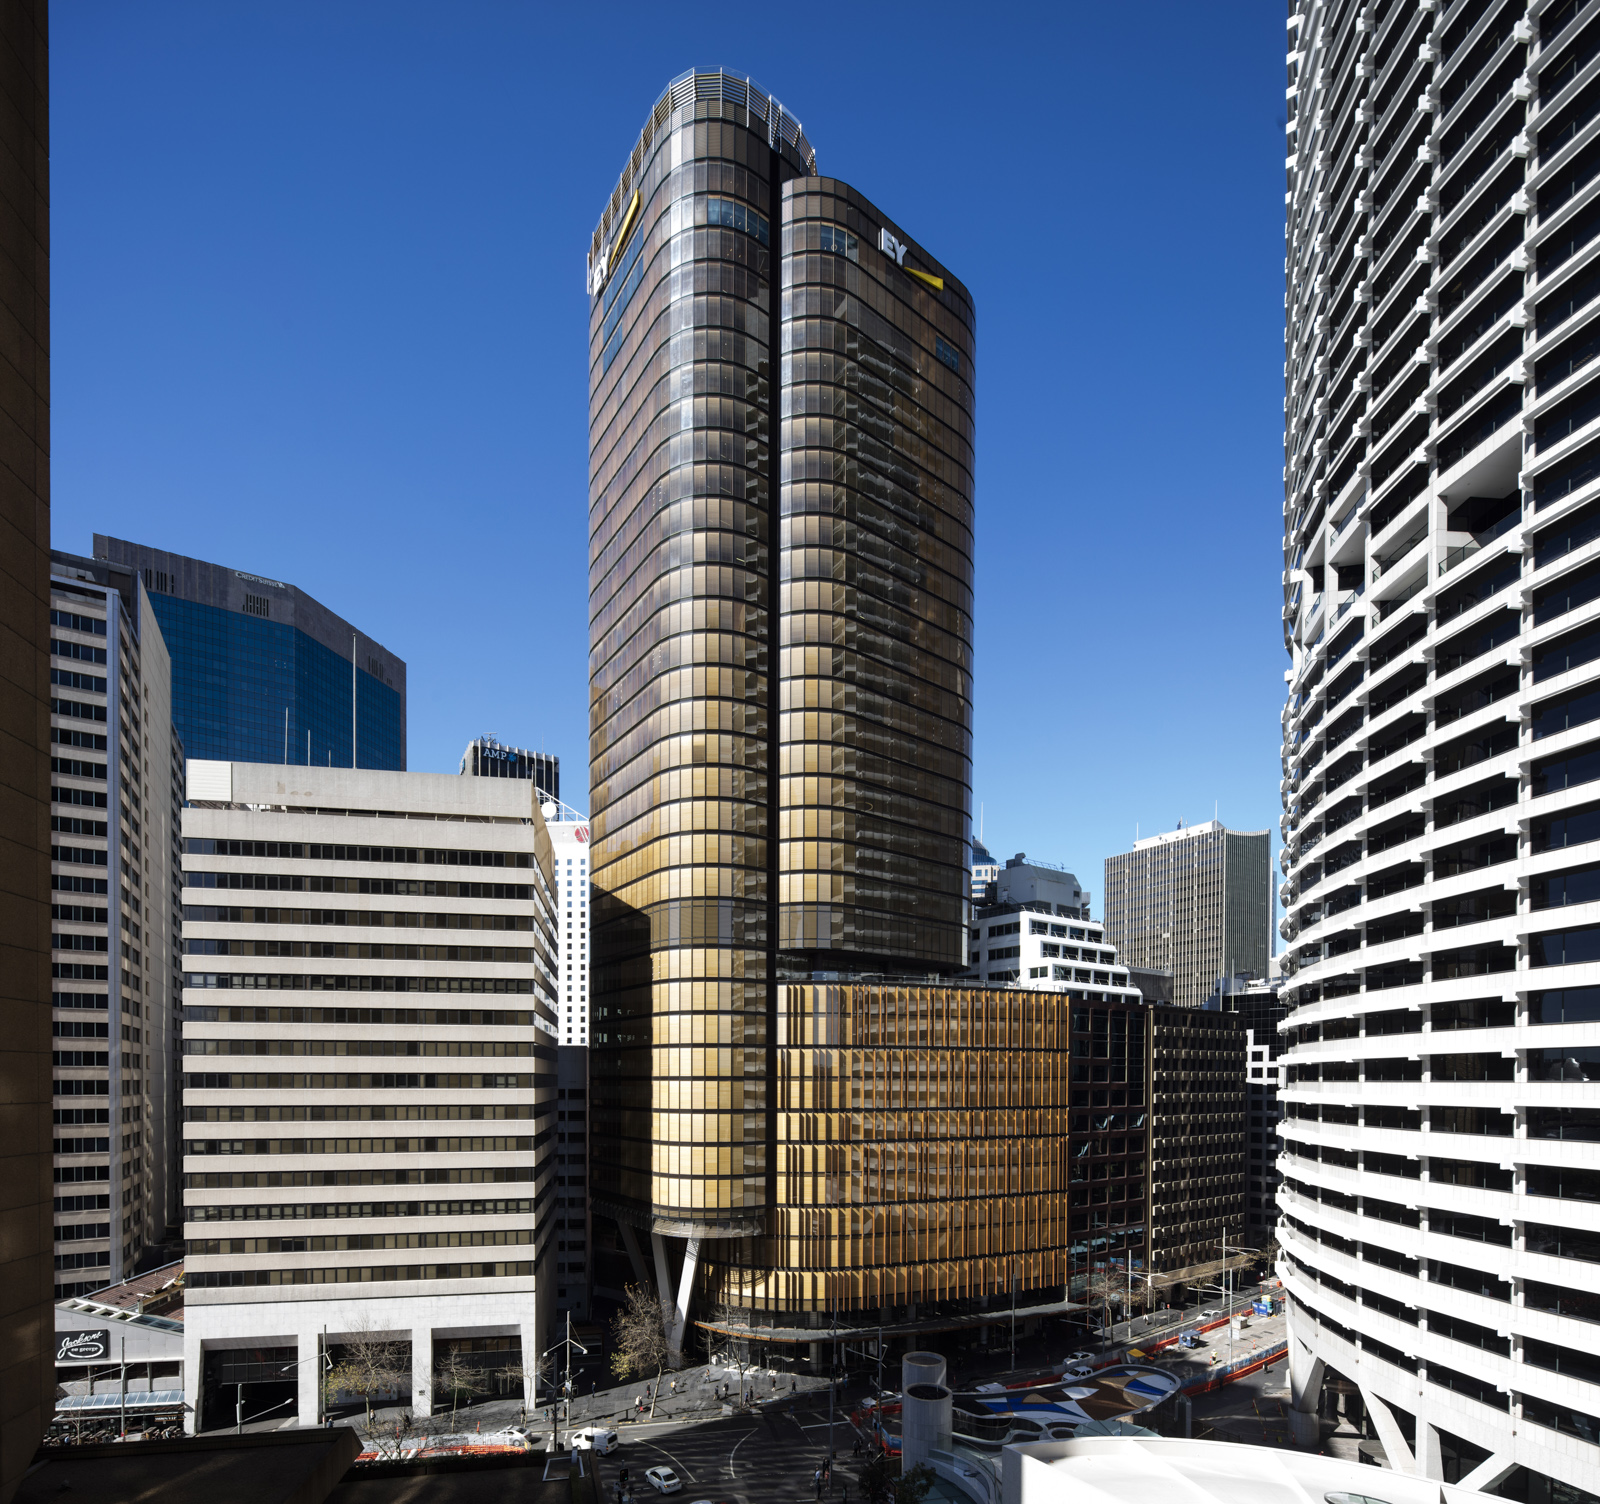 Sydney Towers Shortlisted for World's Best Tall Building